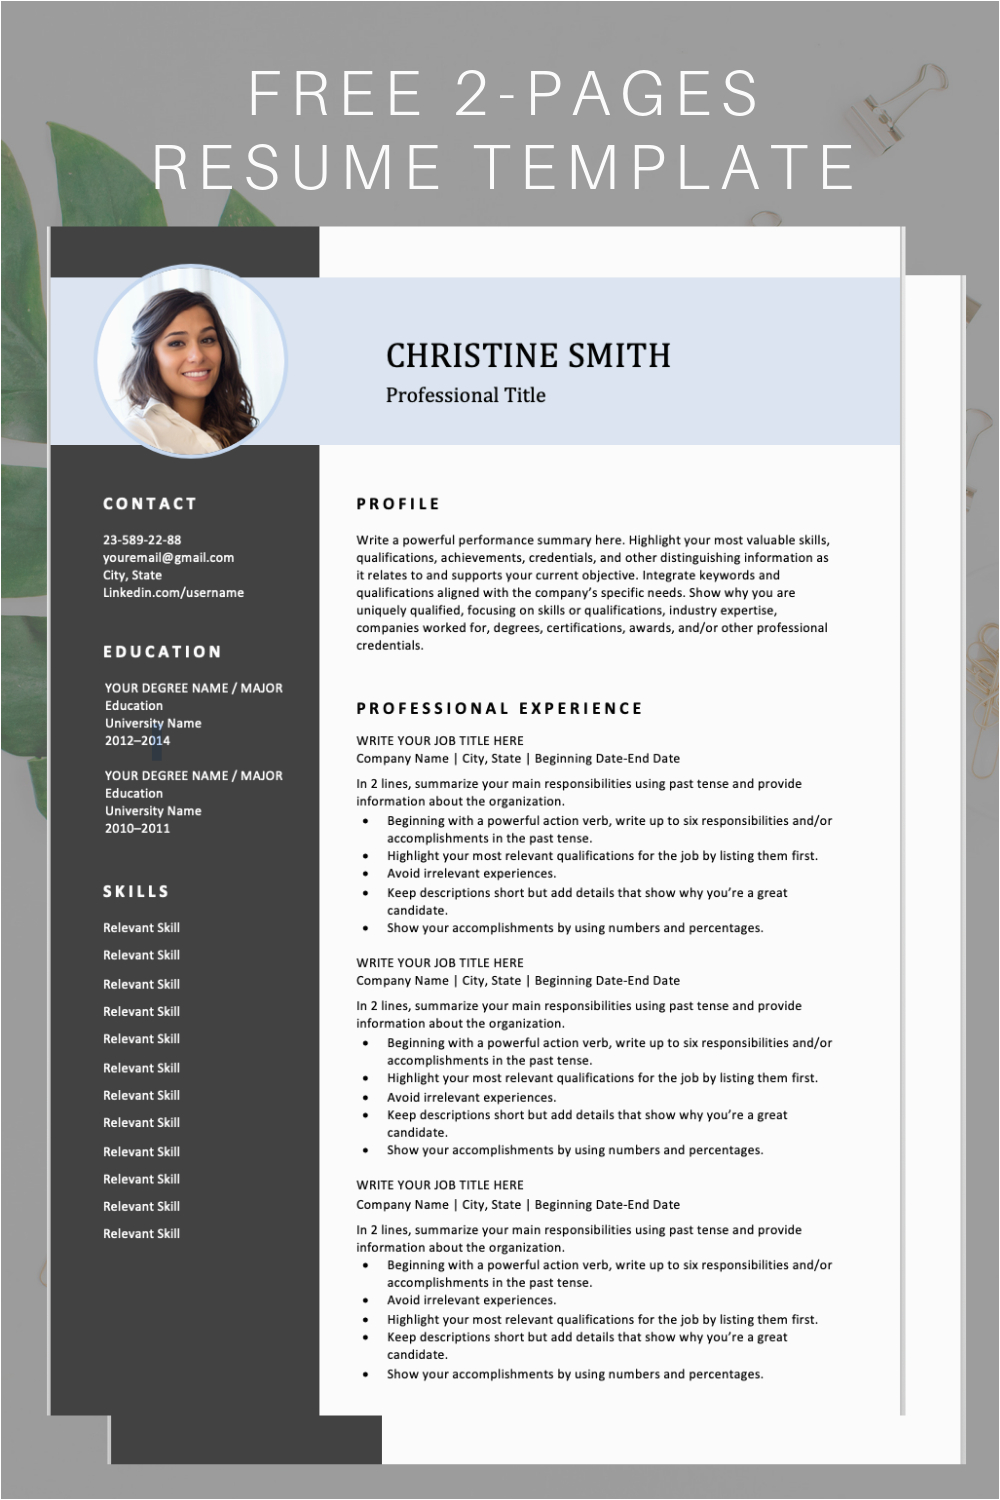 Free Resume Template with Photo Insert Download Download This Professional Resume Template It Includes